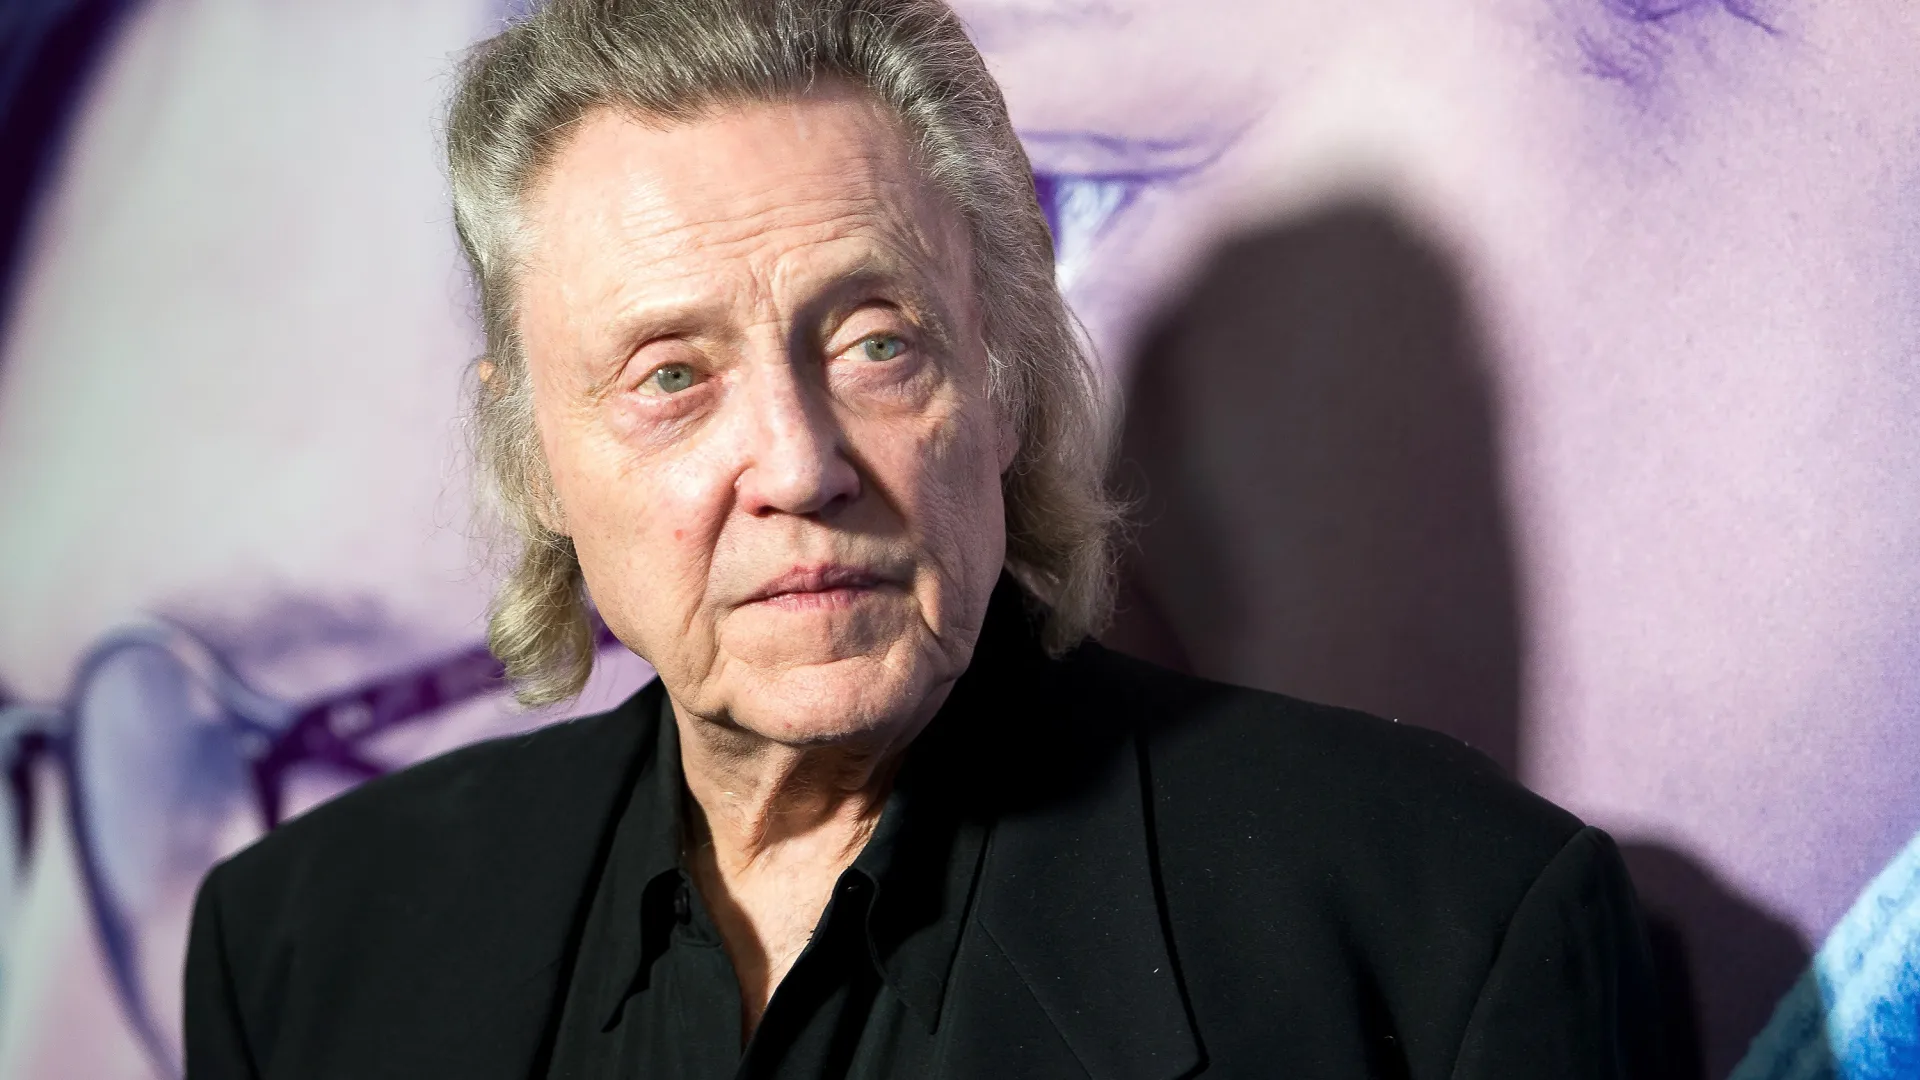 Christopher Walken compares a cell phone to a leash